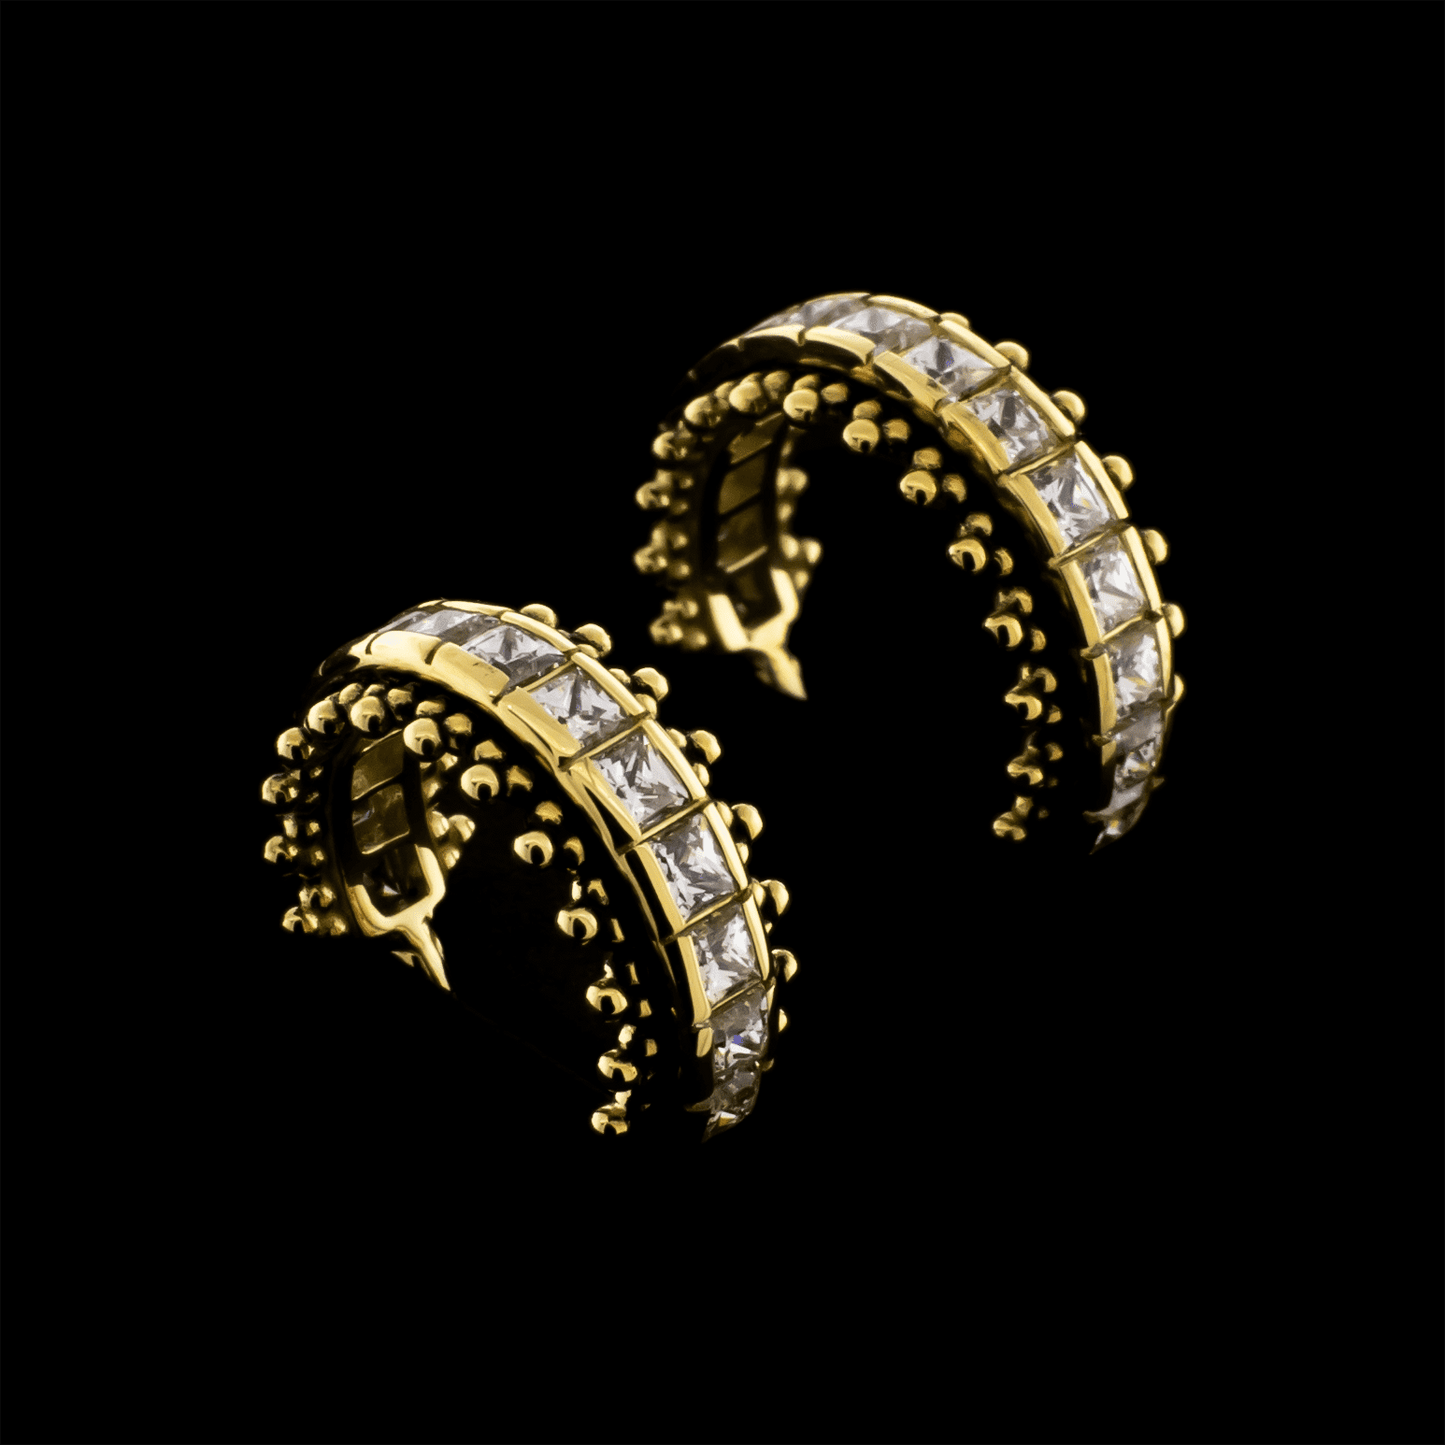 Nero- Hinged Conch Ring - Khrysos Jewelry